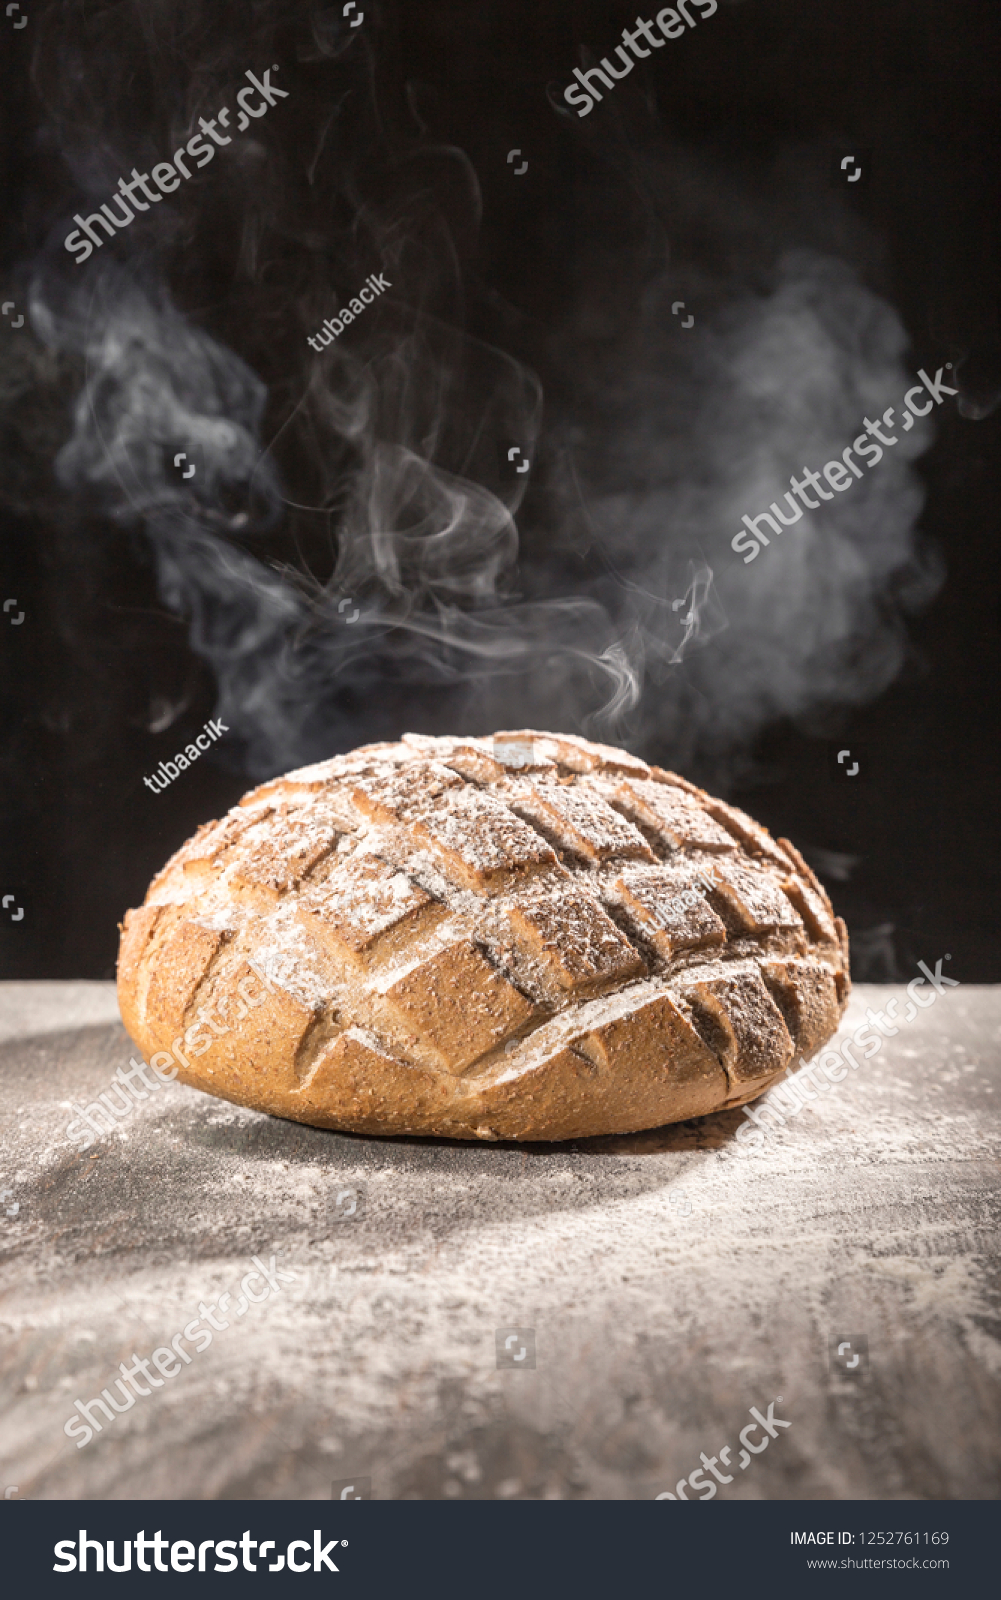 March 18, 2015 Hot Steamed homemade flour and bread in studio shot on black background #1252761169